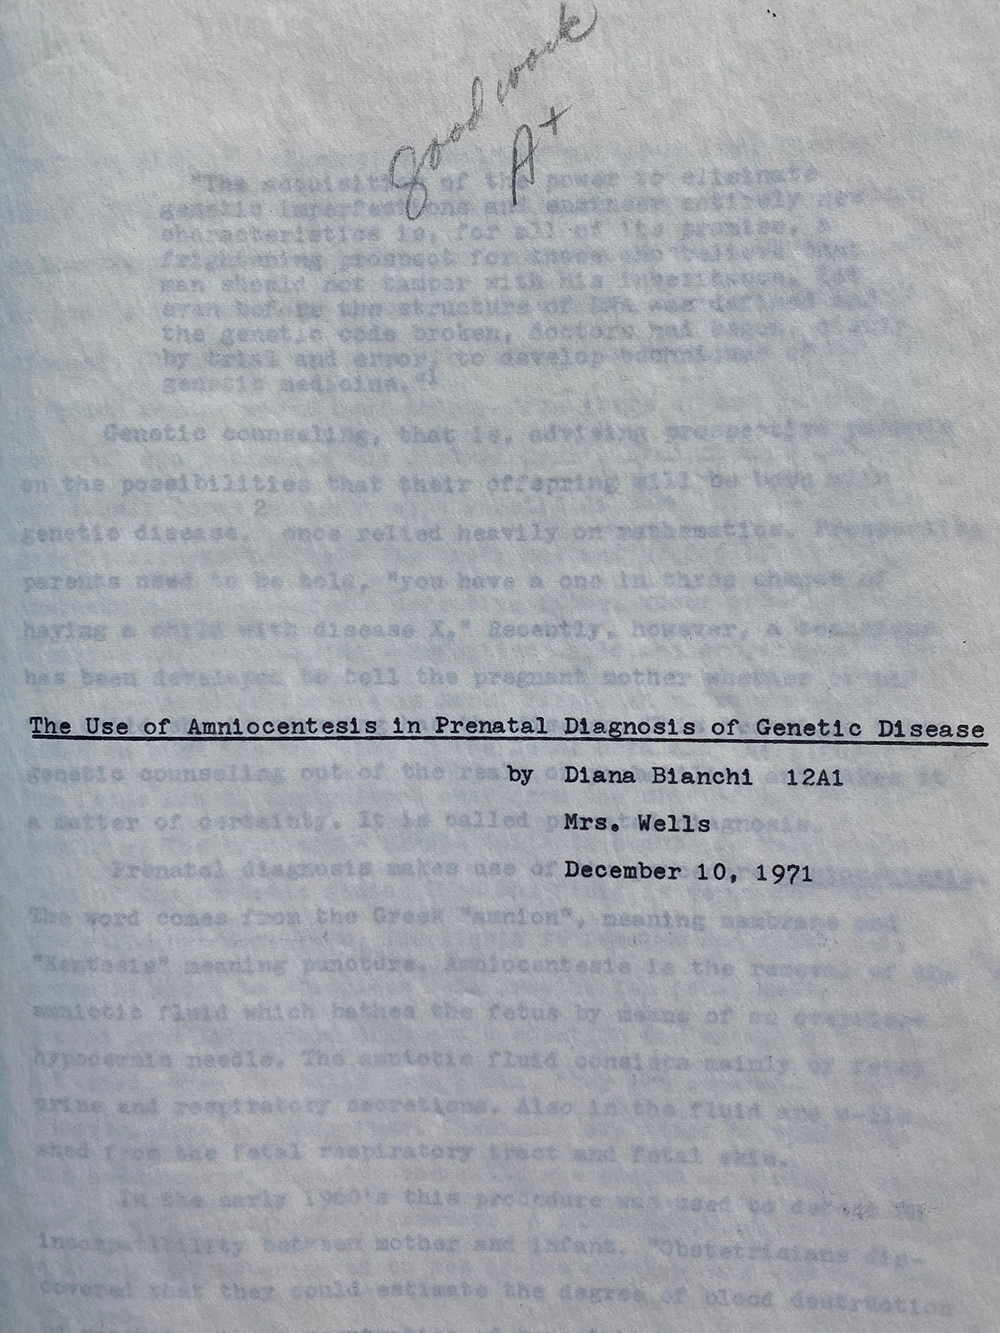 The title page was typed on a typewriter with the following text, “The Use of Amniocentesis in Prenatal Diagnosis of Genetic Disease, by Diana Bianchi, 12A1, Mrs. Wells, December 10, 1971.” In the top, a handwritten note from Mrs. Wells reads, “Good work, A+”